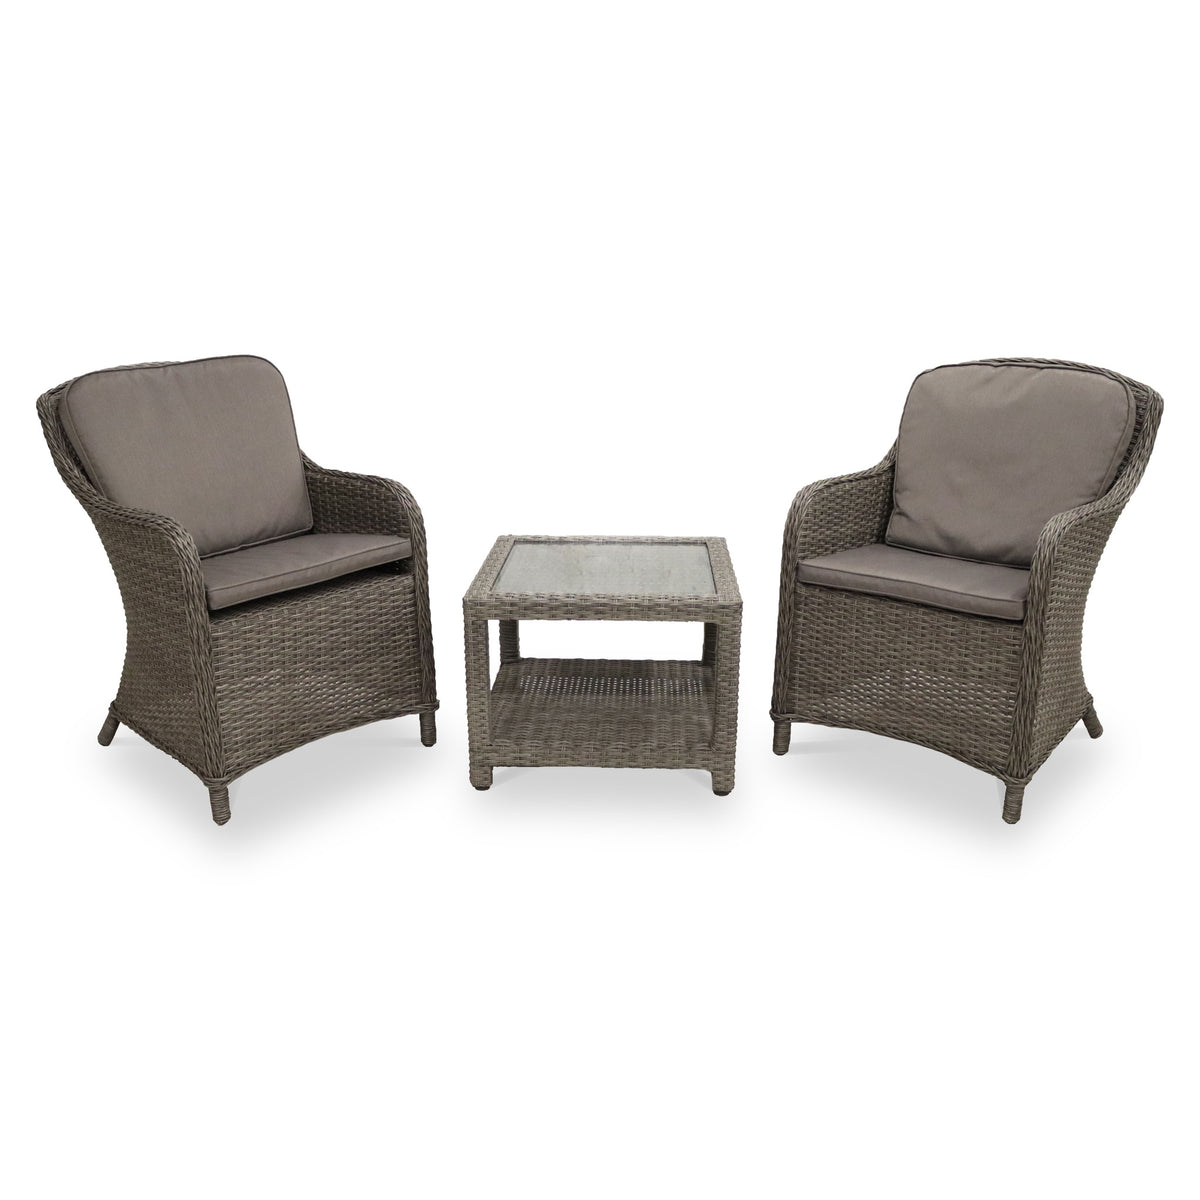 Paris 2 Seater Imperial Companion Set from Roseland Furniture